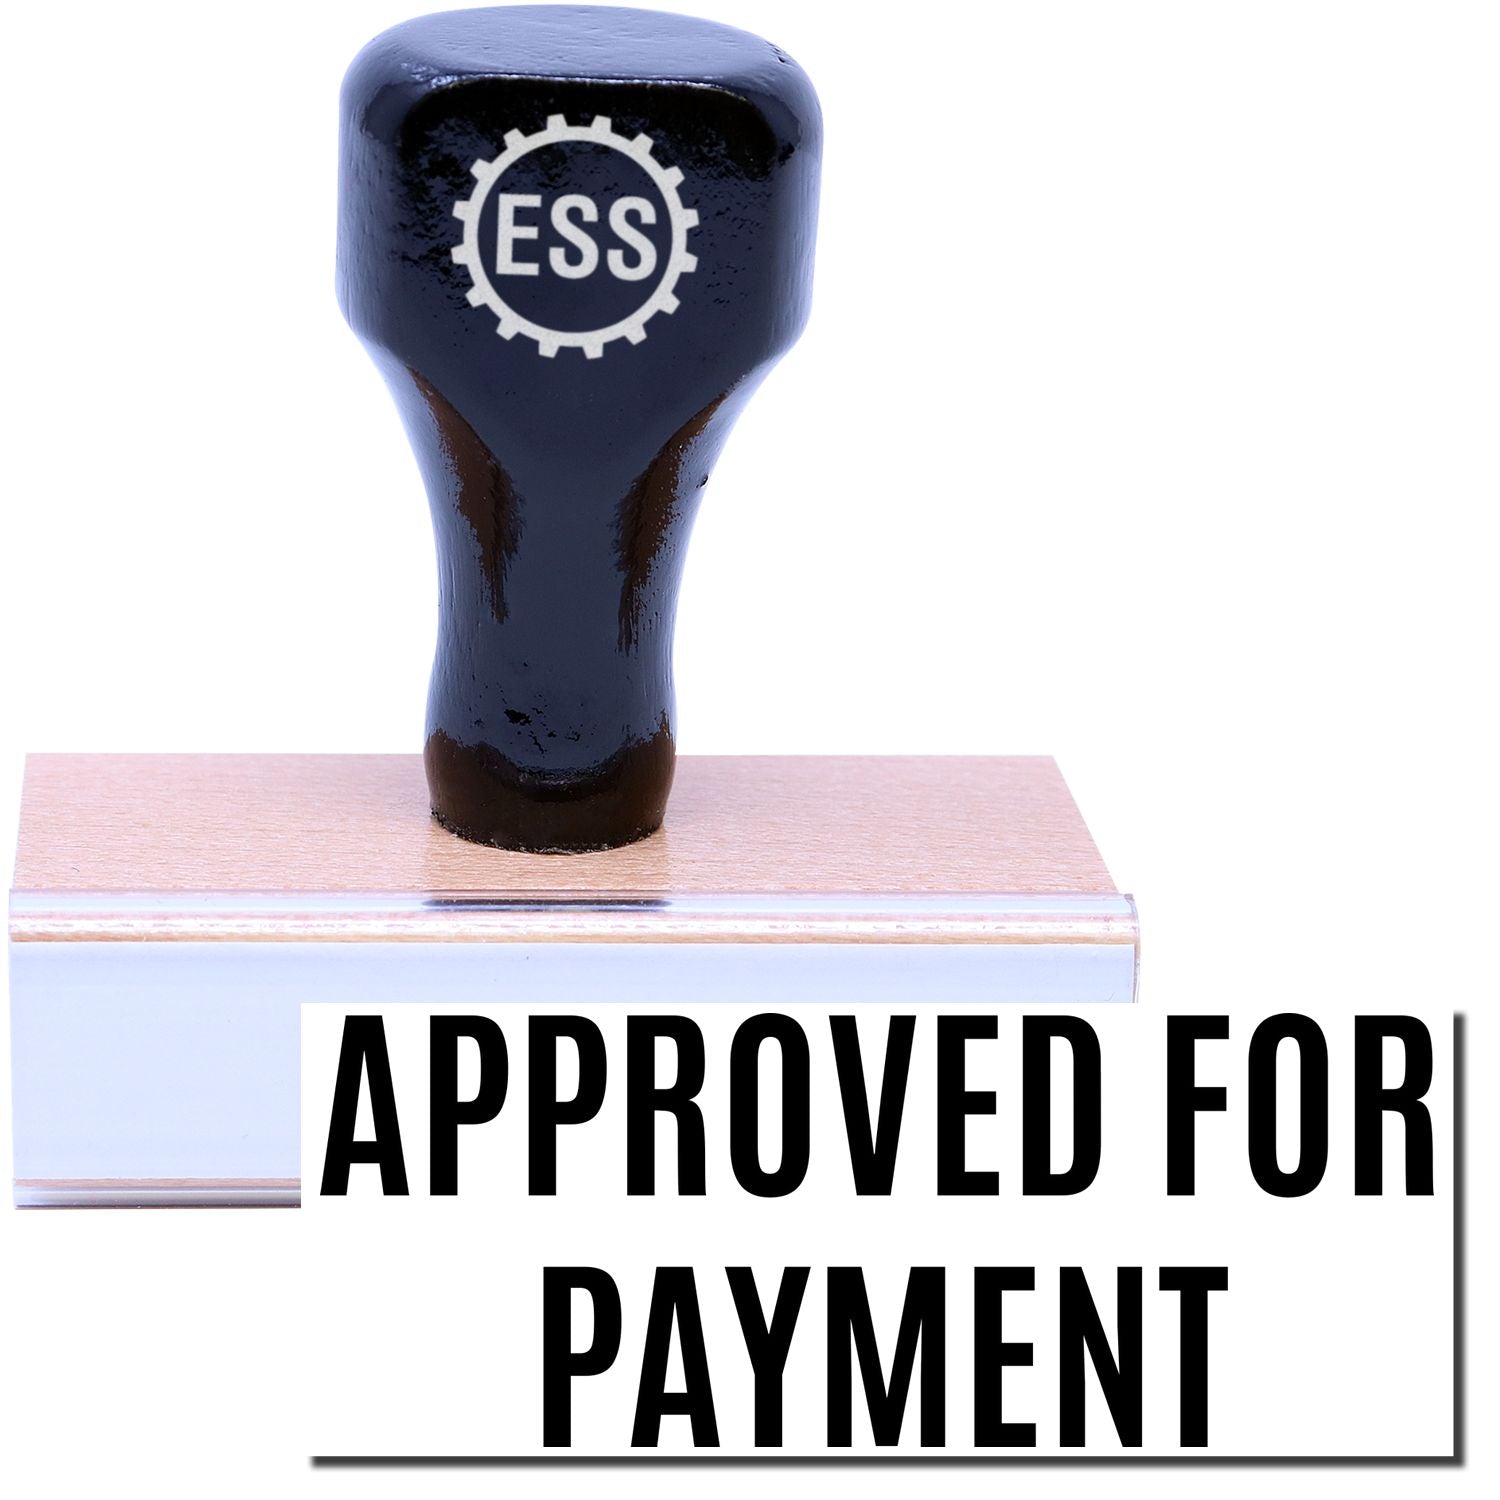 A stock office rubber stamp with a stamped image showing how the text "APPROVED FOR PAYMENT" in a large narrow font is displayed after stamping.